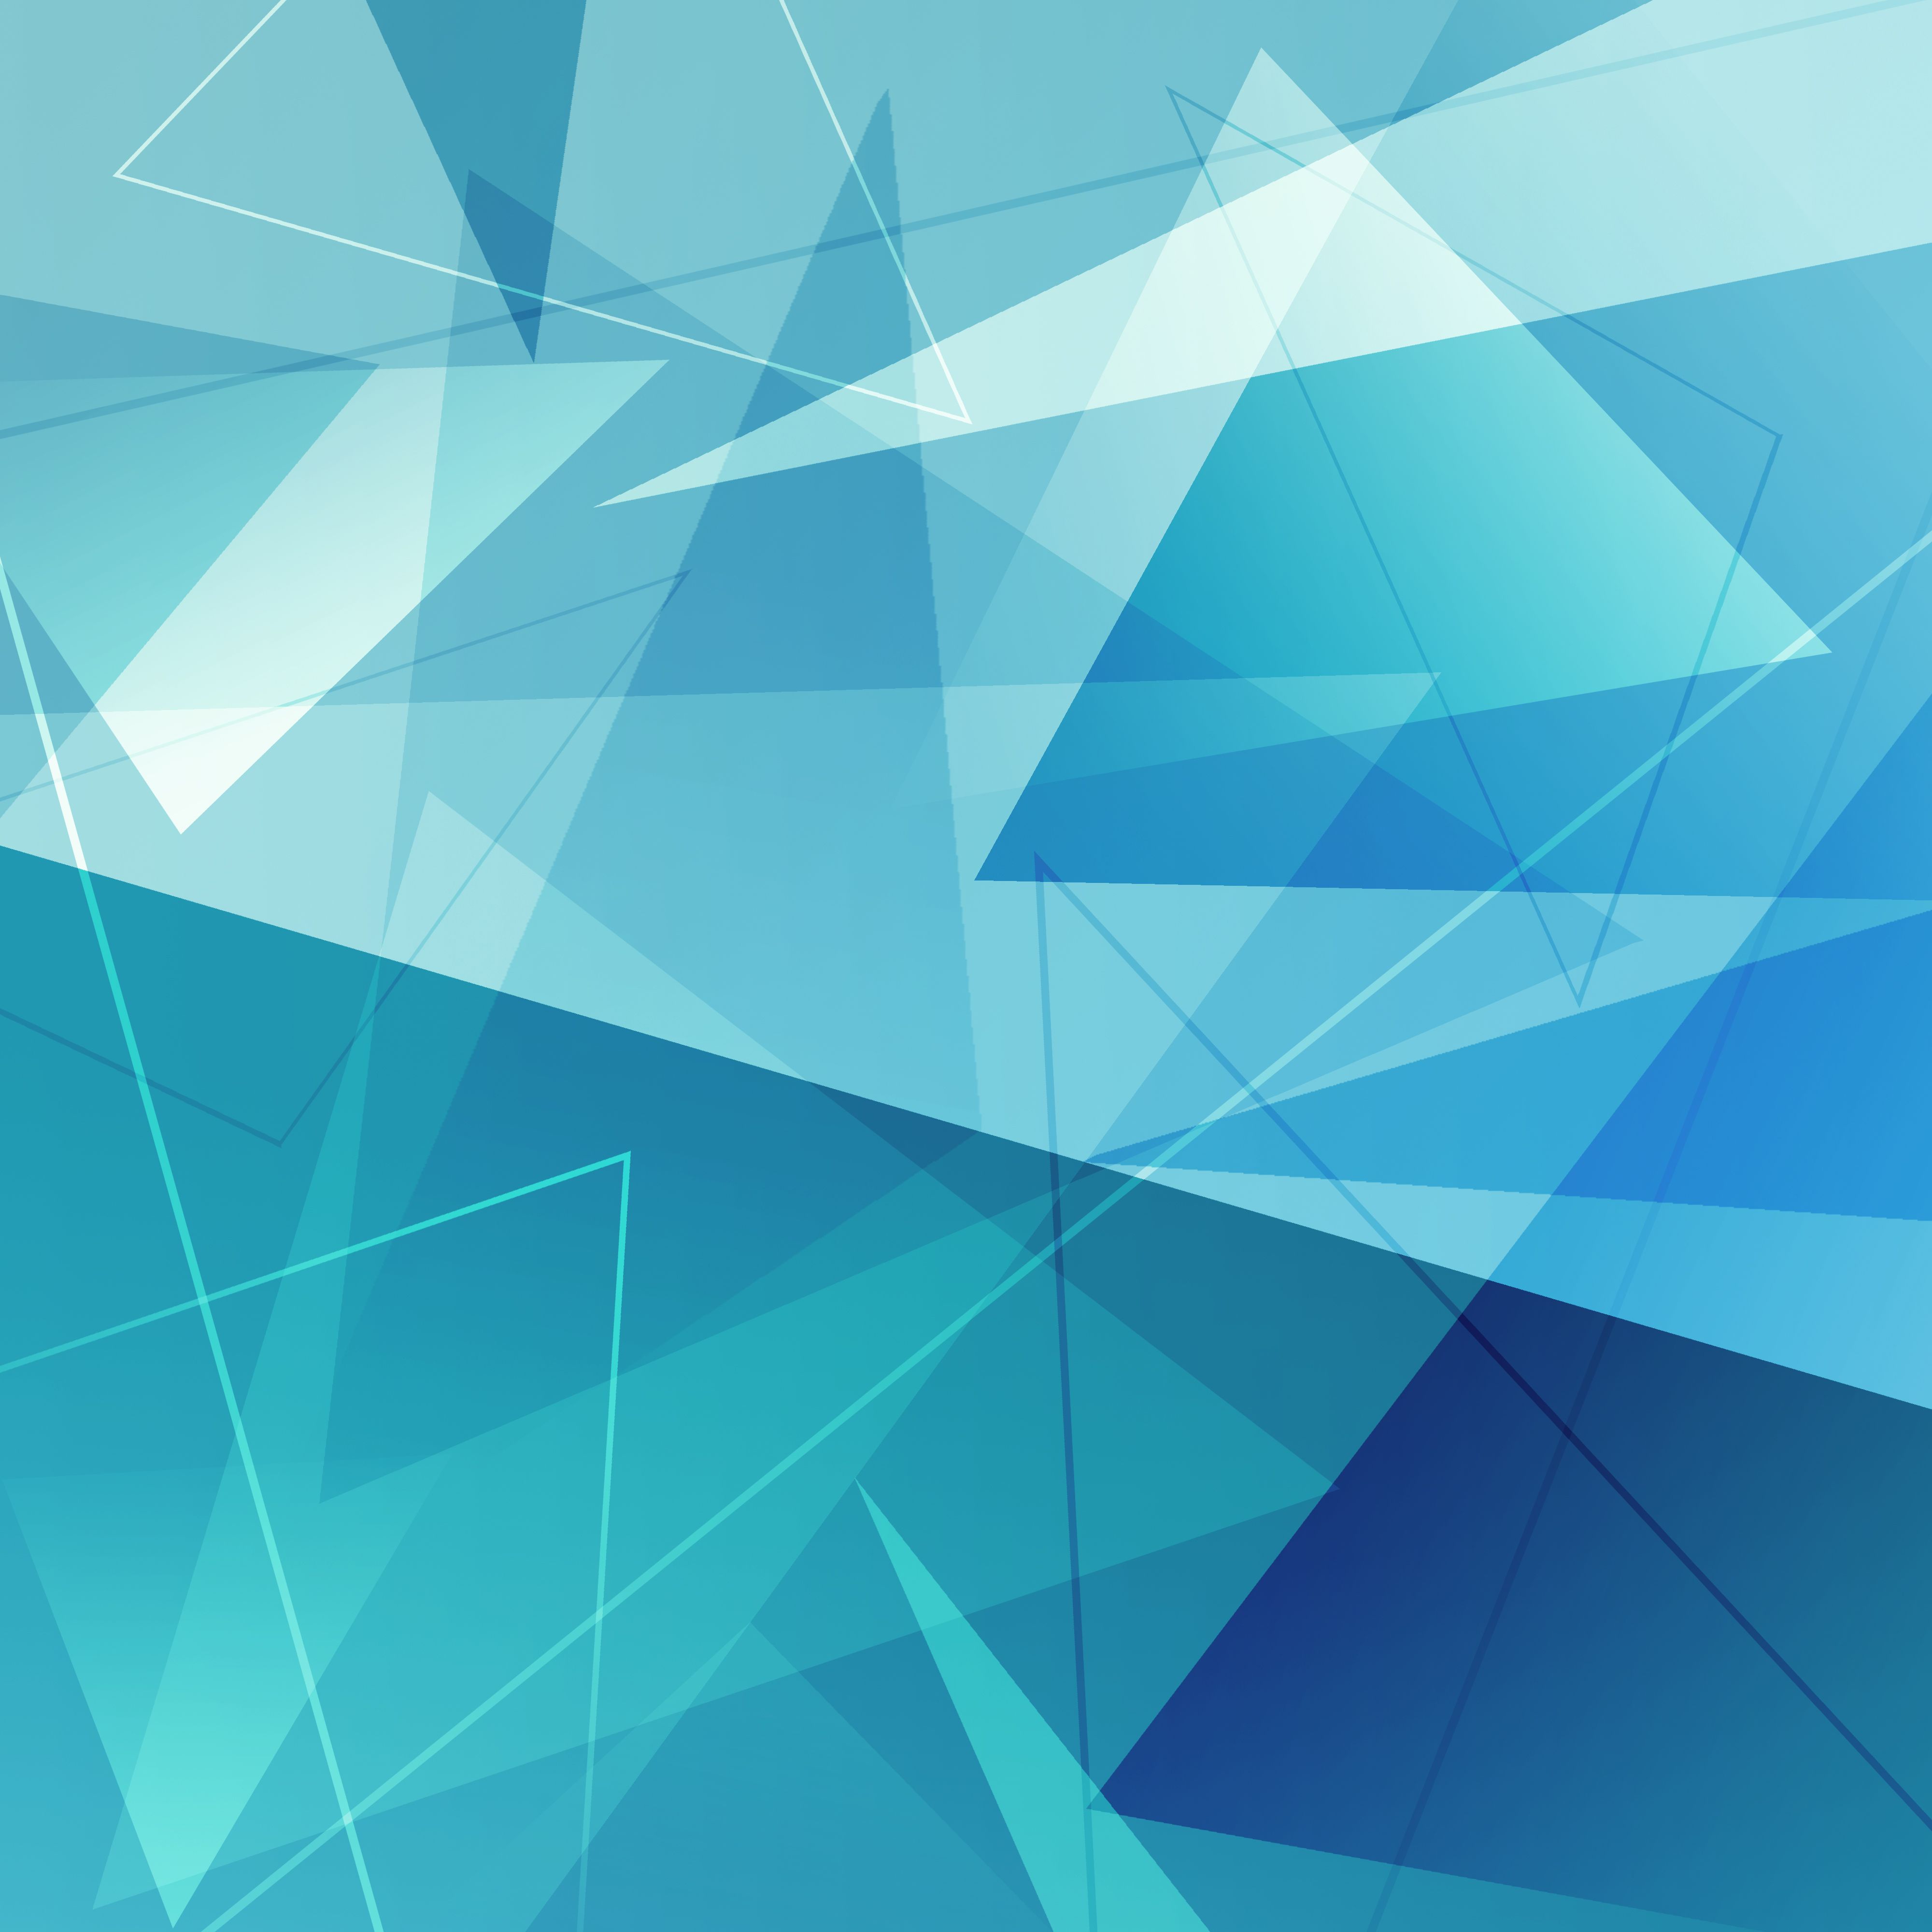 HD Polygonal Texture/Background by ParadisiacPicture on DeviantArt